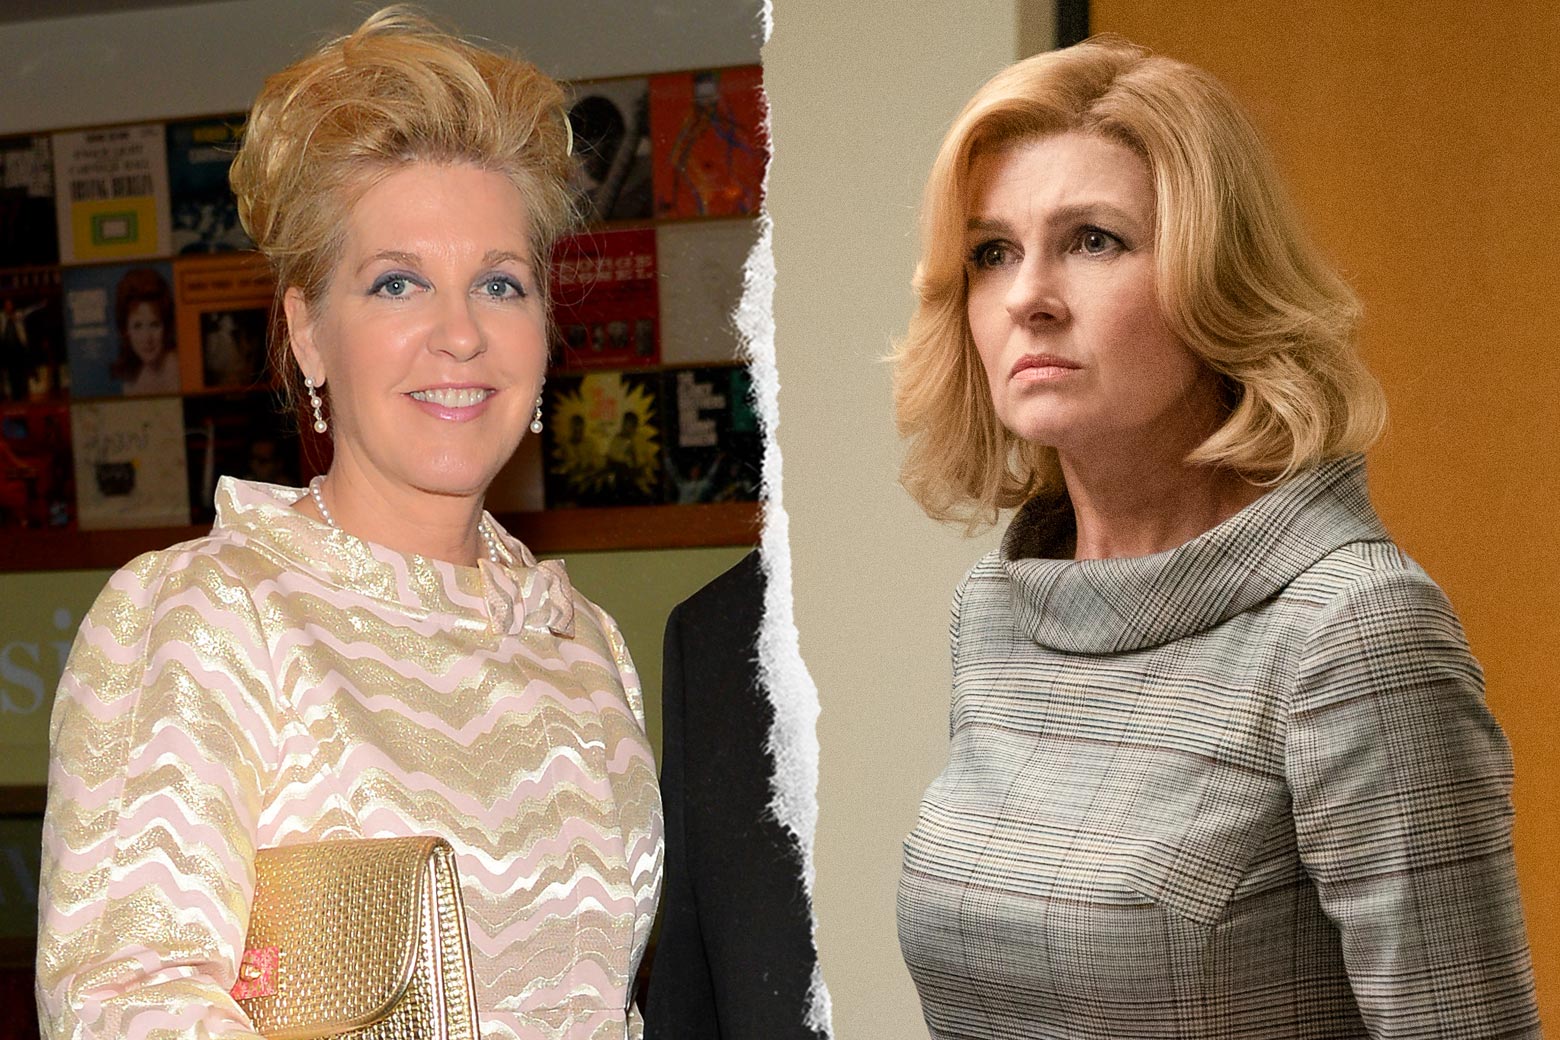 Beth Ailes, and Connie Britton as Beth Ailes.